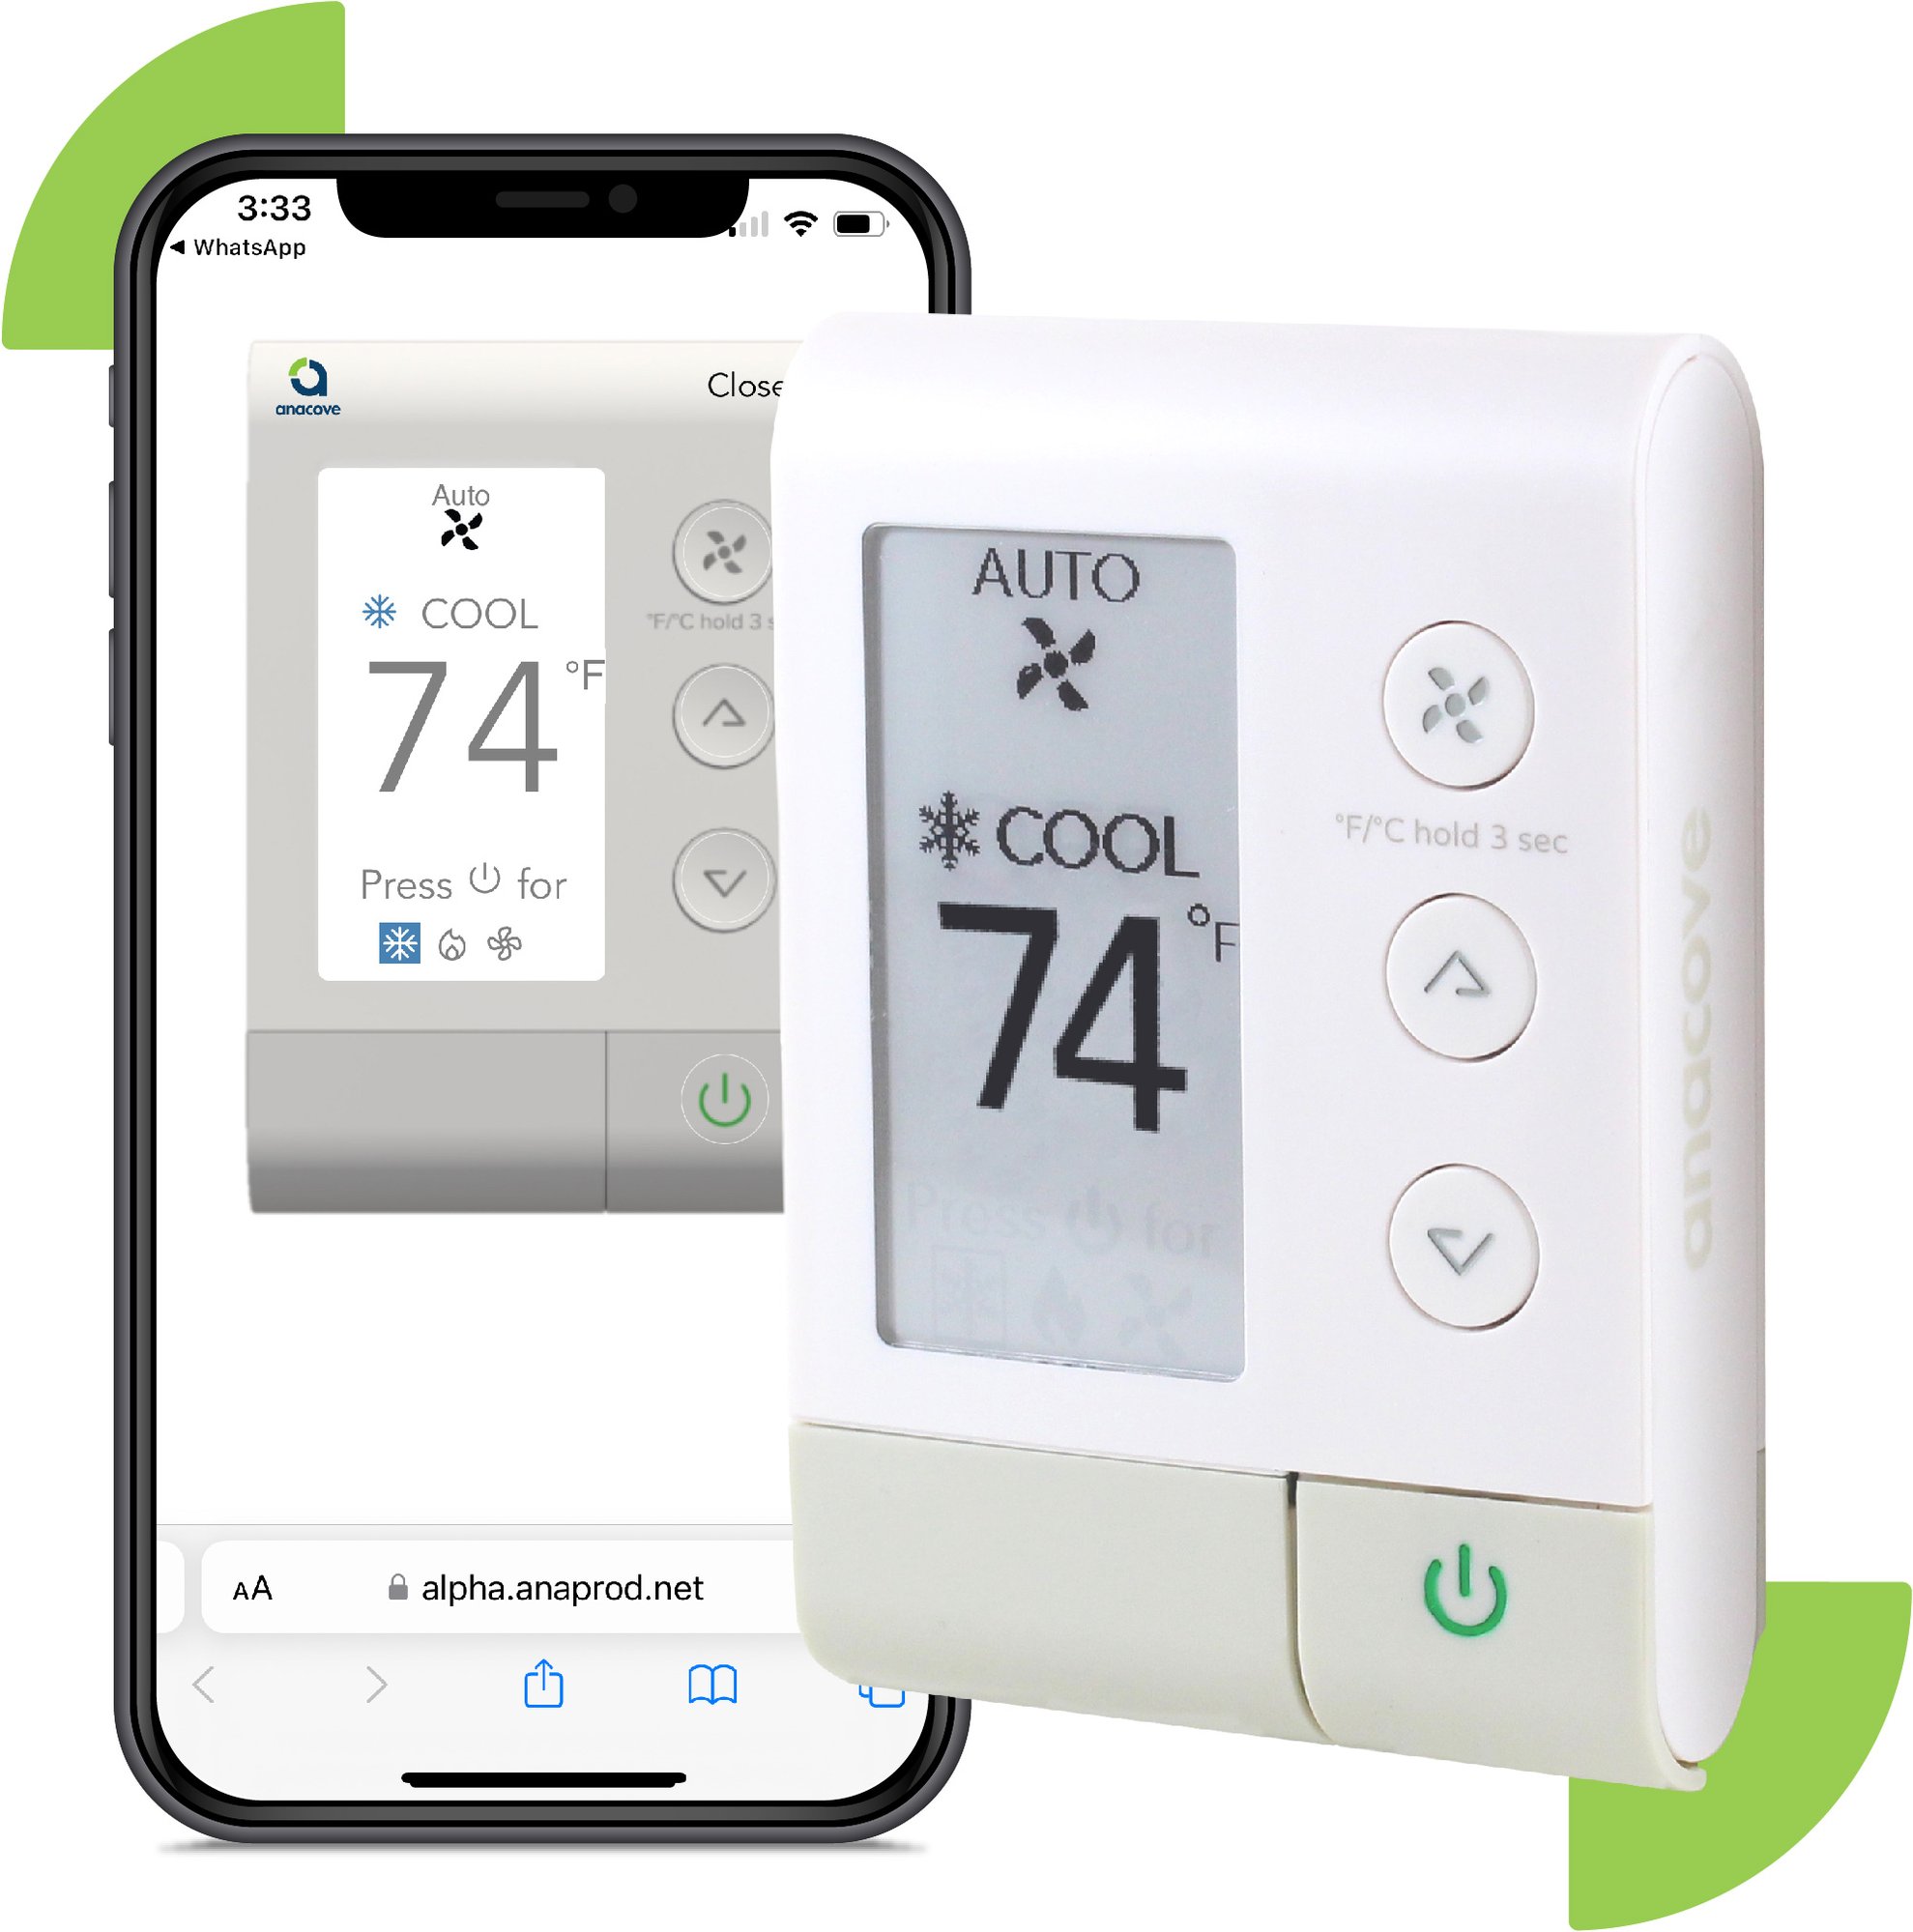 anacove thermostat and smartphone application